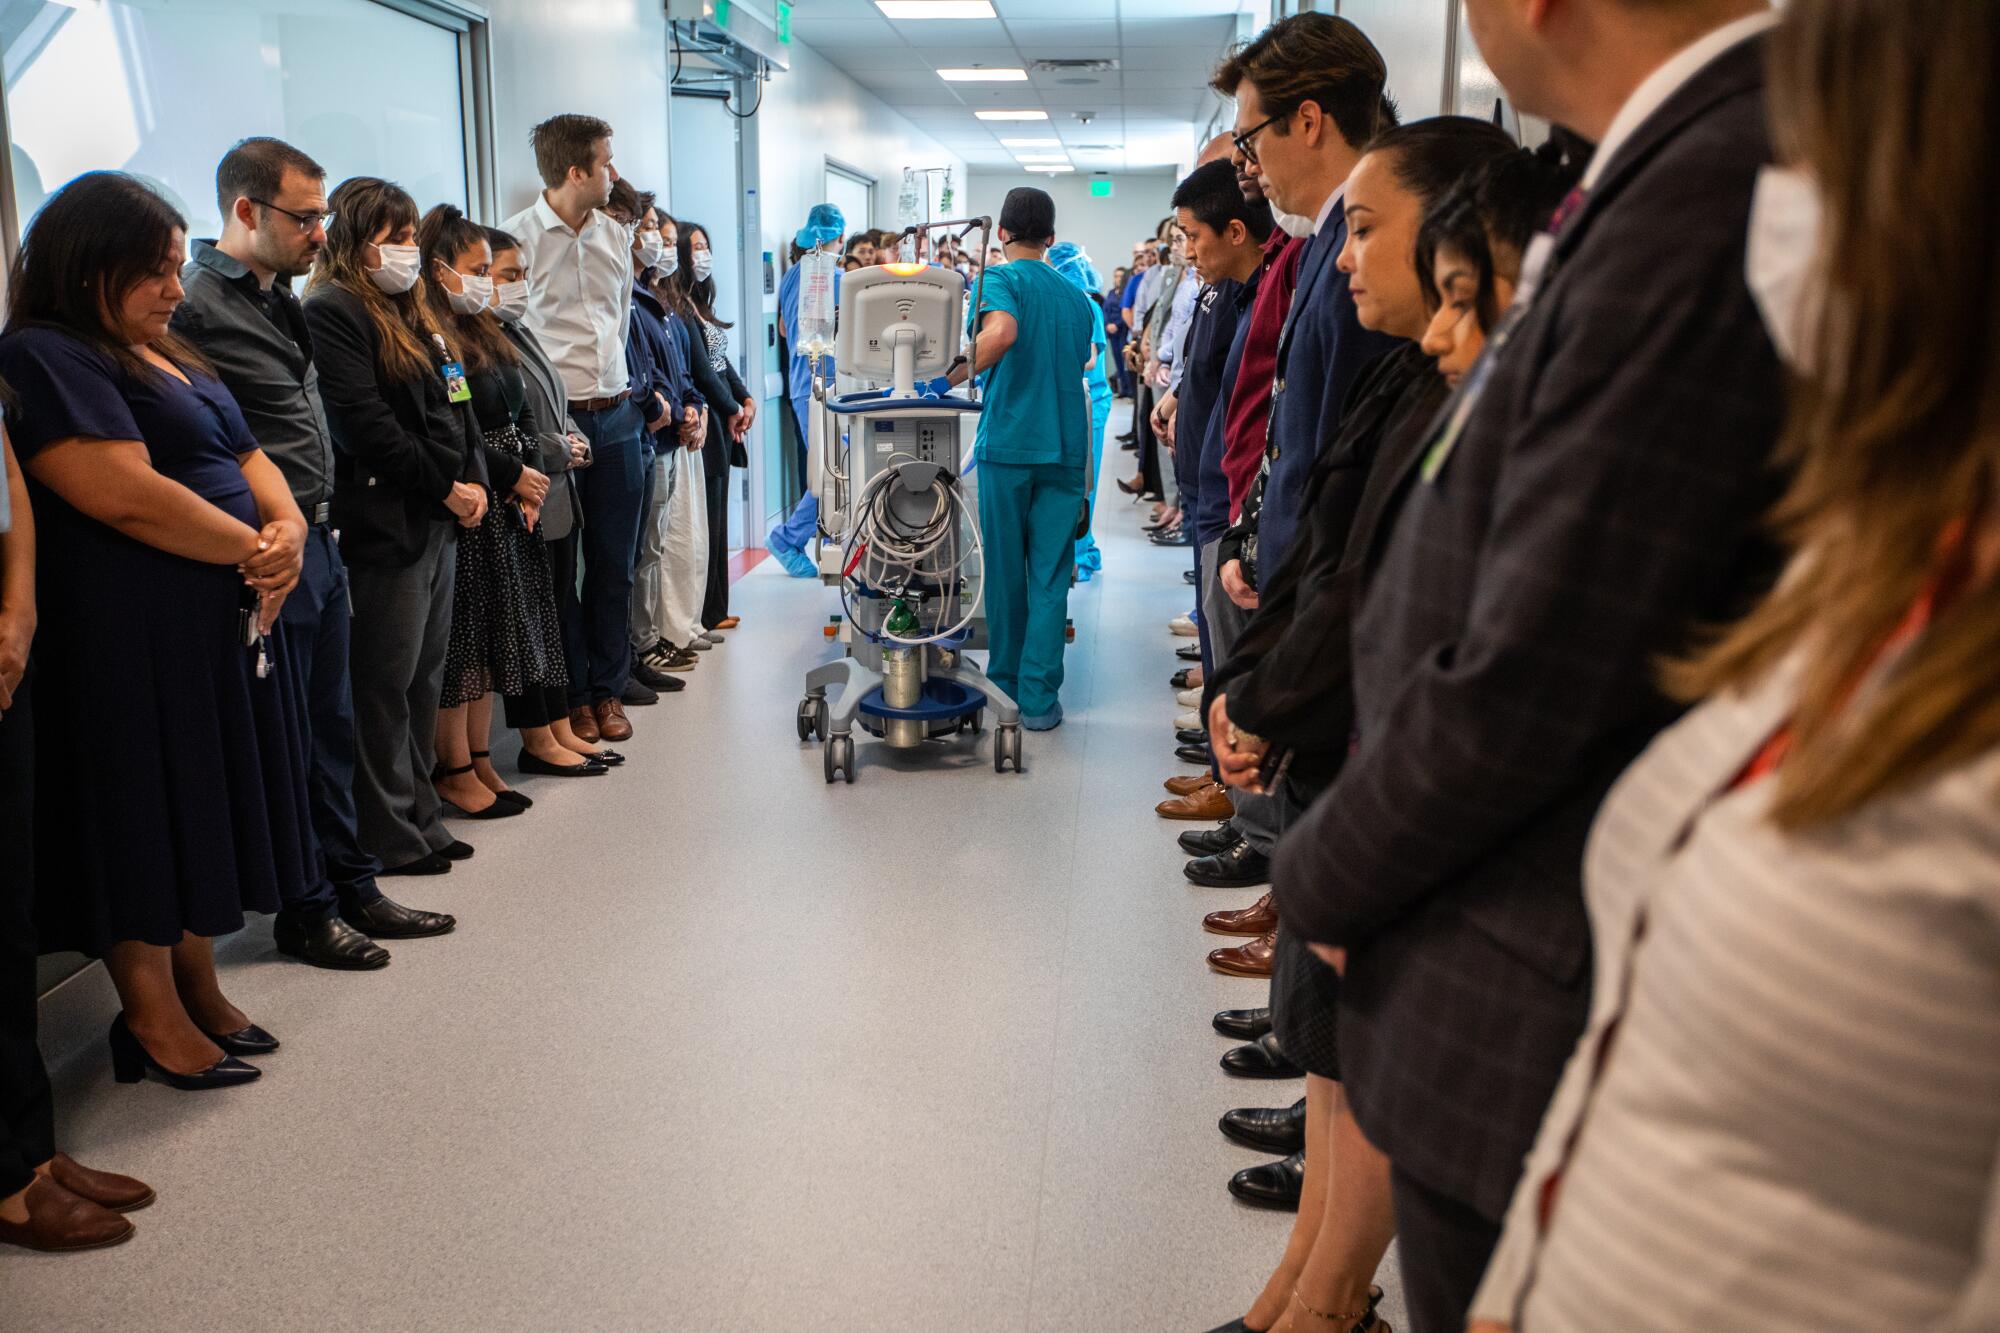 People line a hallway as staff in scrubs push through with a hospital bed flanked by a stand with a monitor.